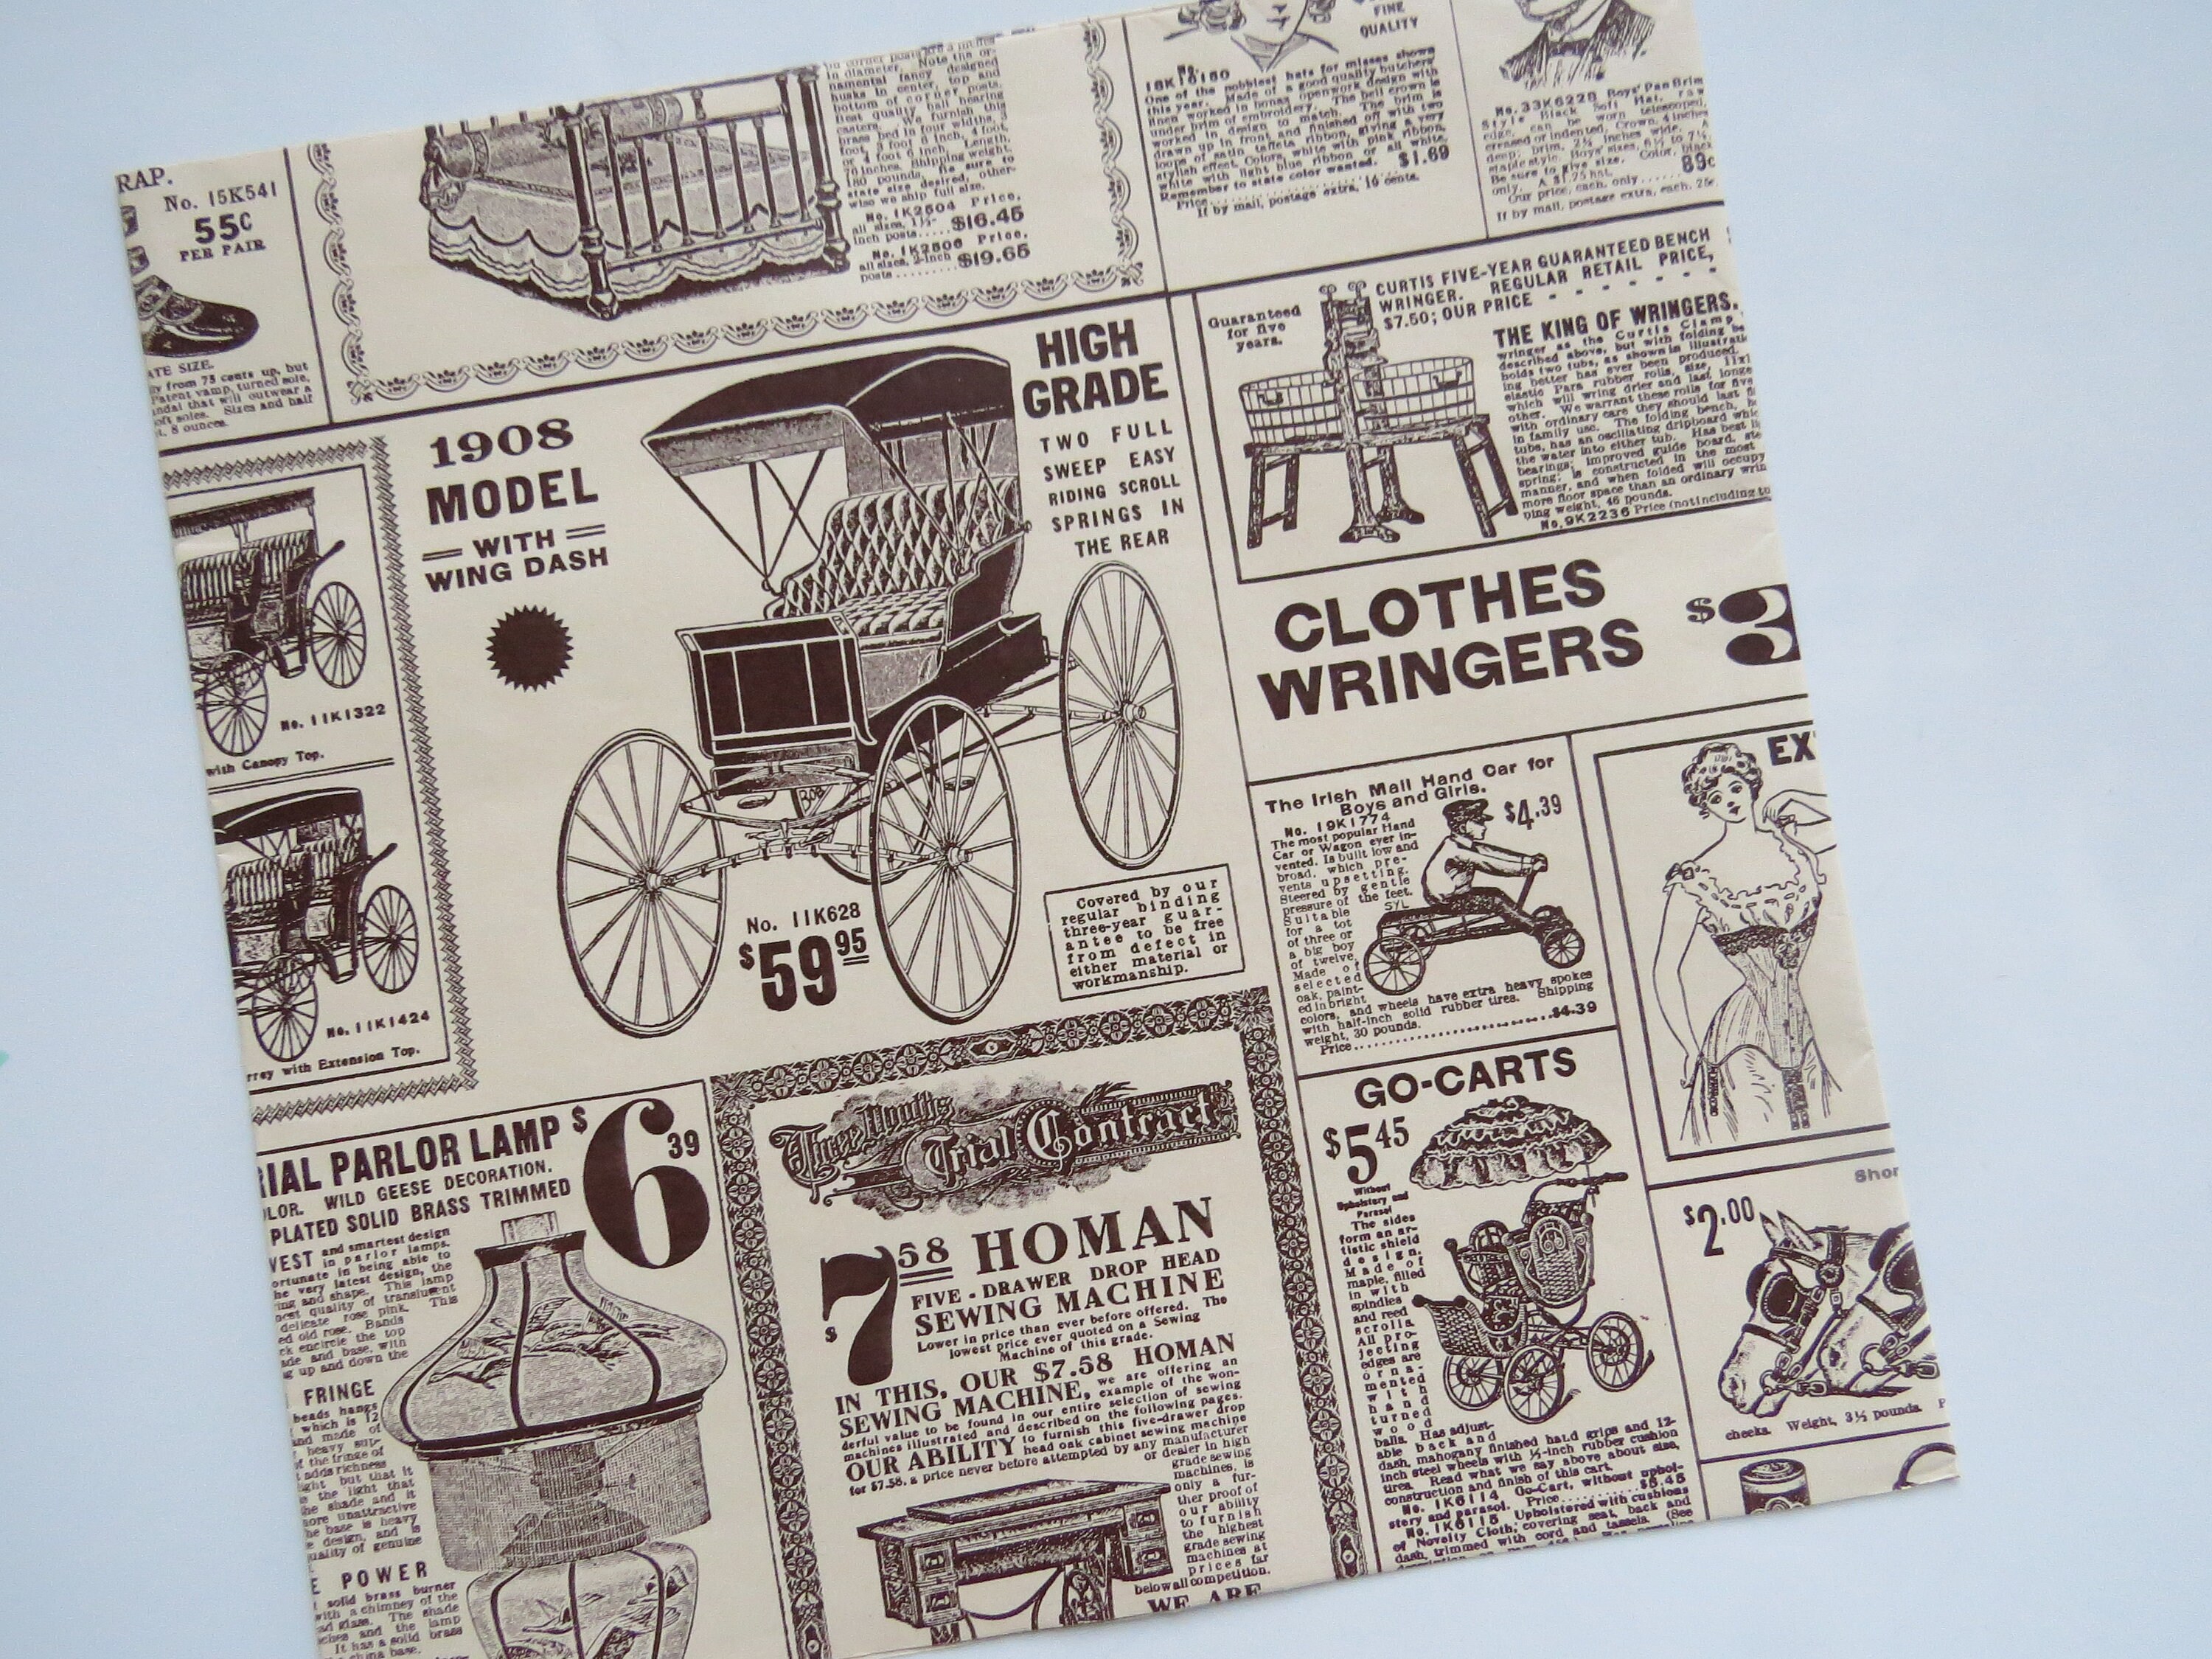 Vintage Swedish Newspaper / Wrapping Paper